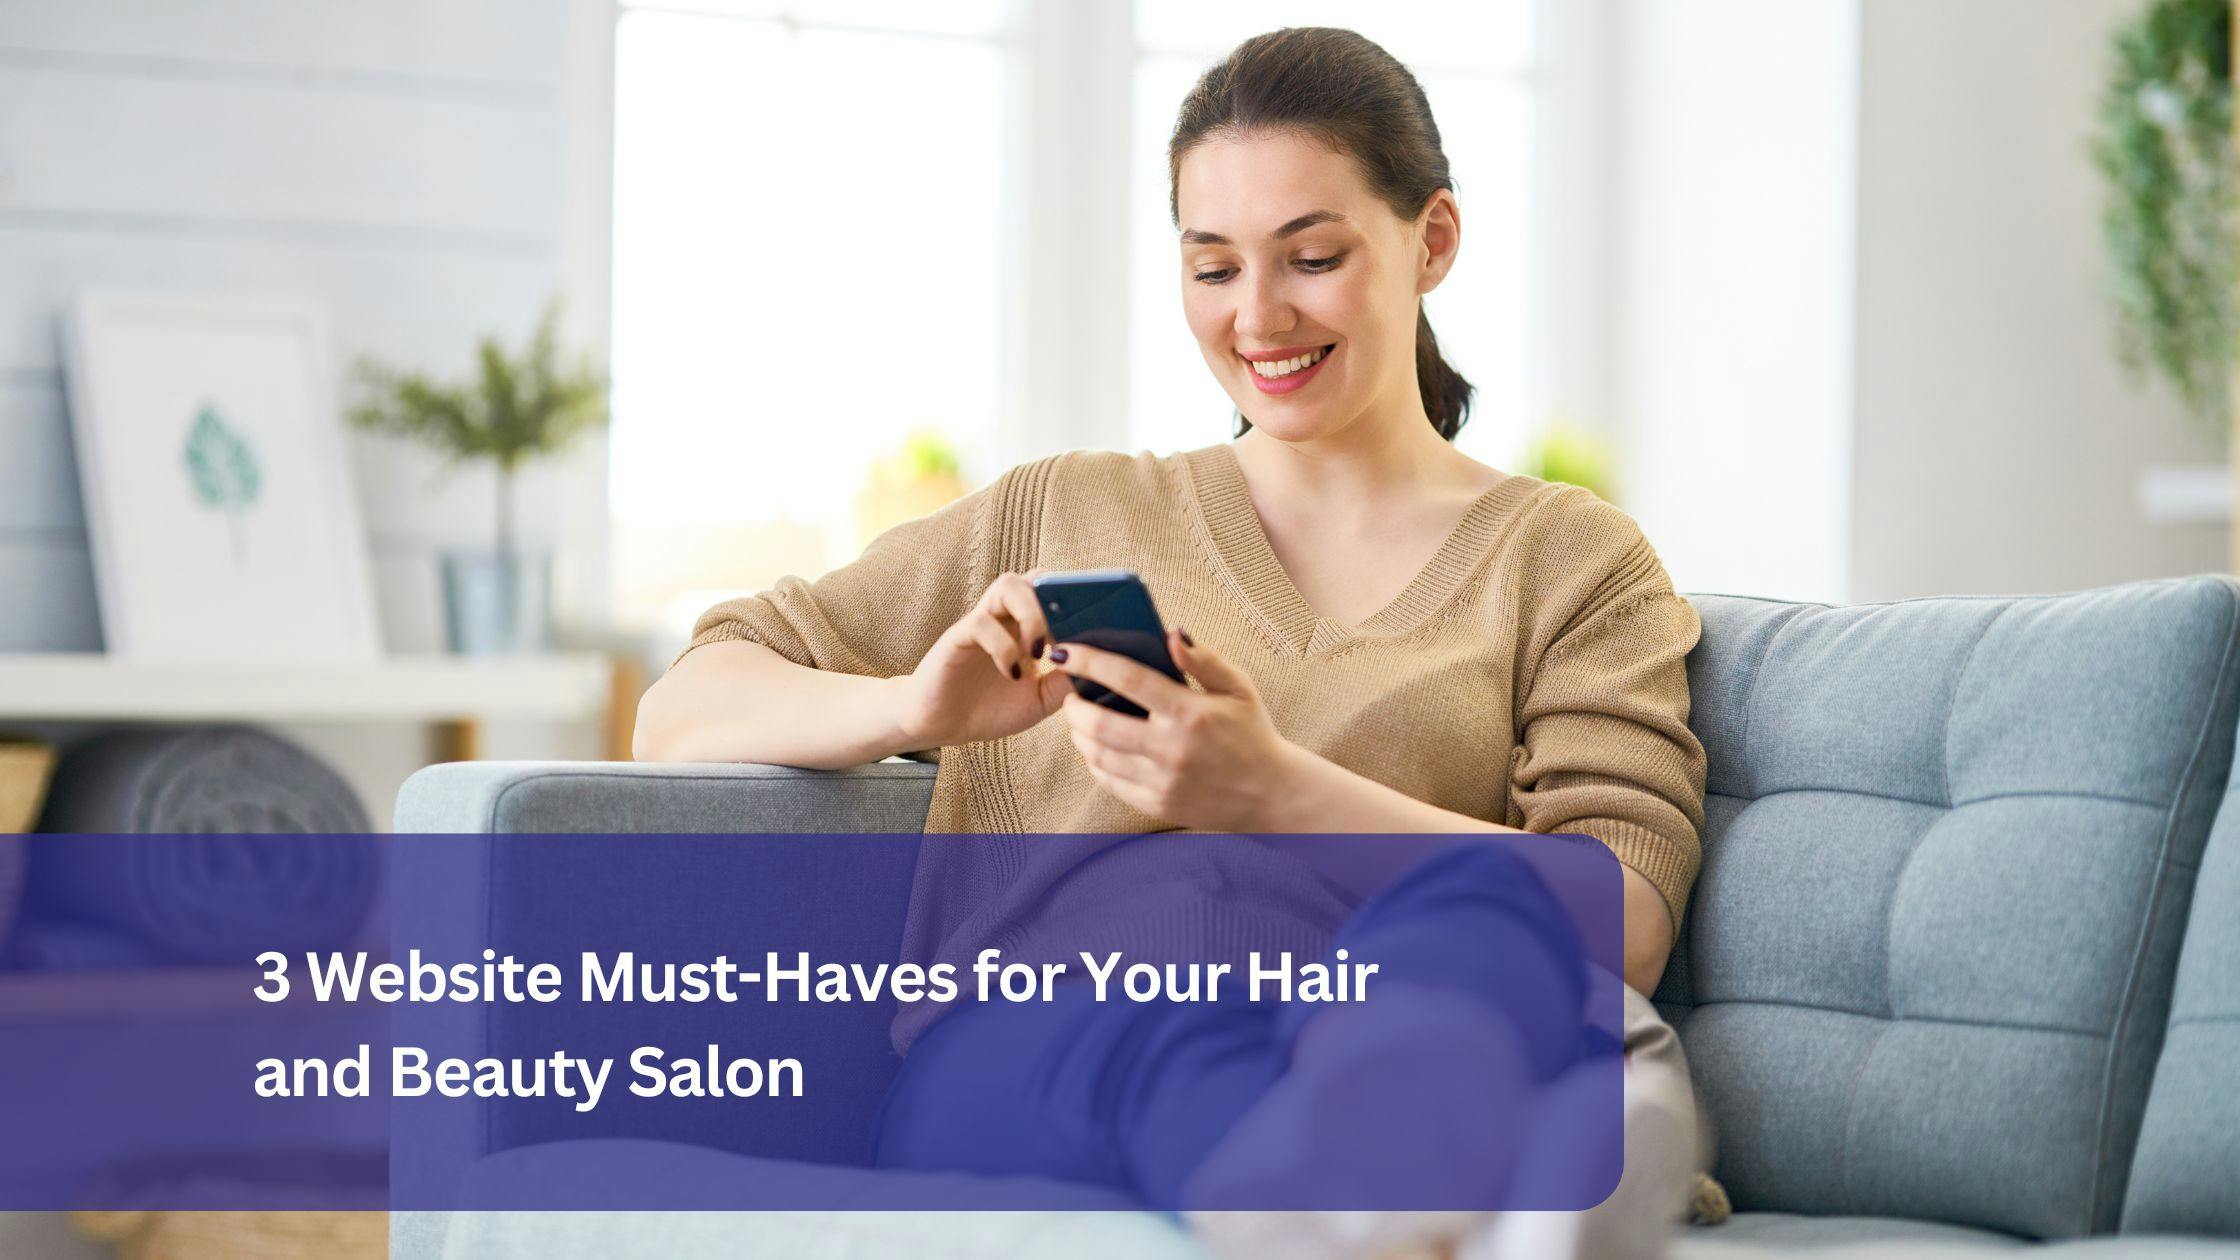 3 Website Must-Haves for Your Hair and Beauty Salon